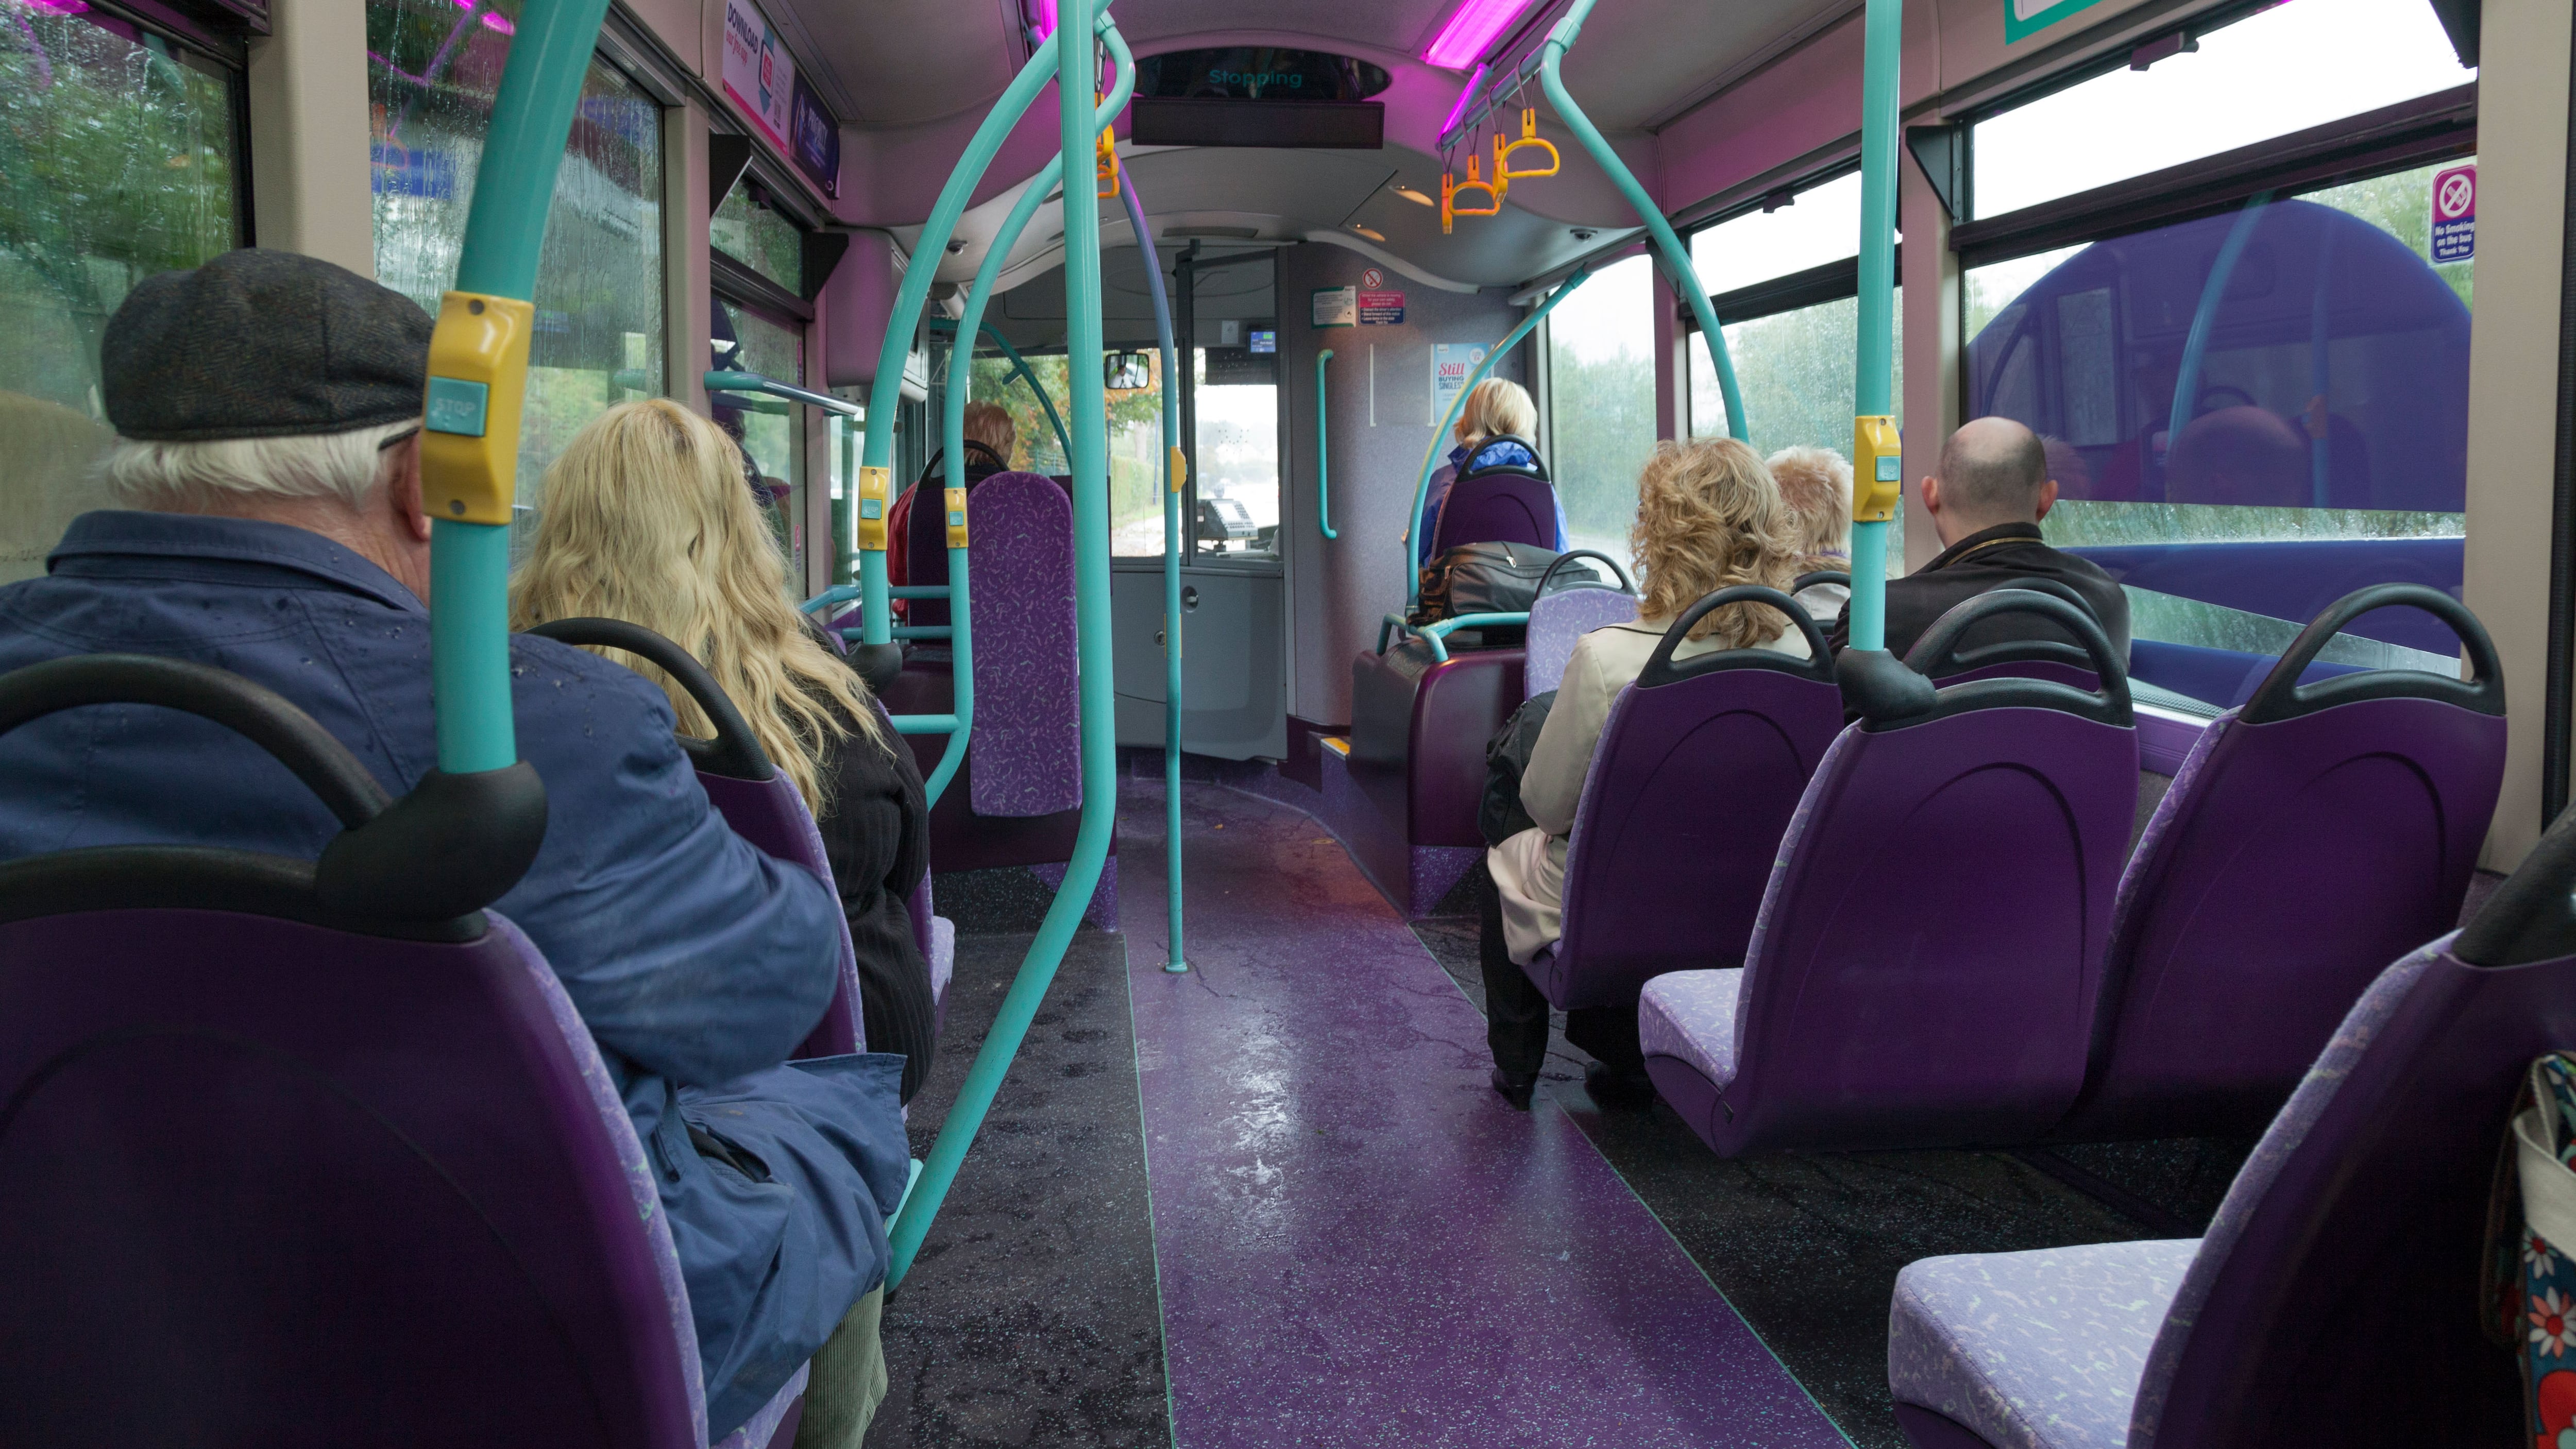 Many people would like to see more funding allocated to bus services, a survey has suggested